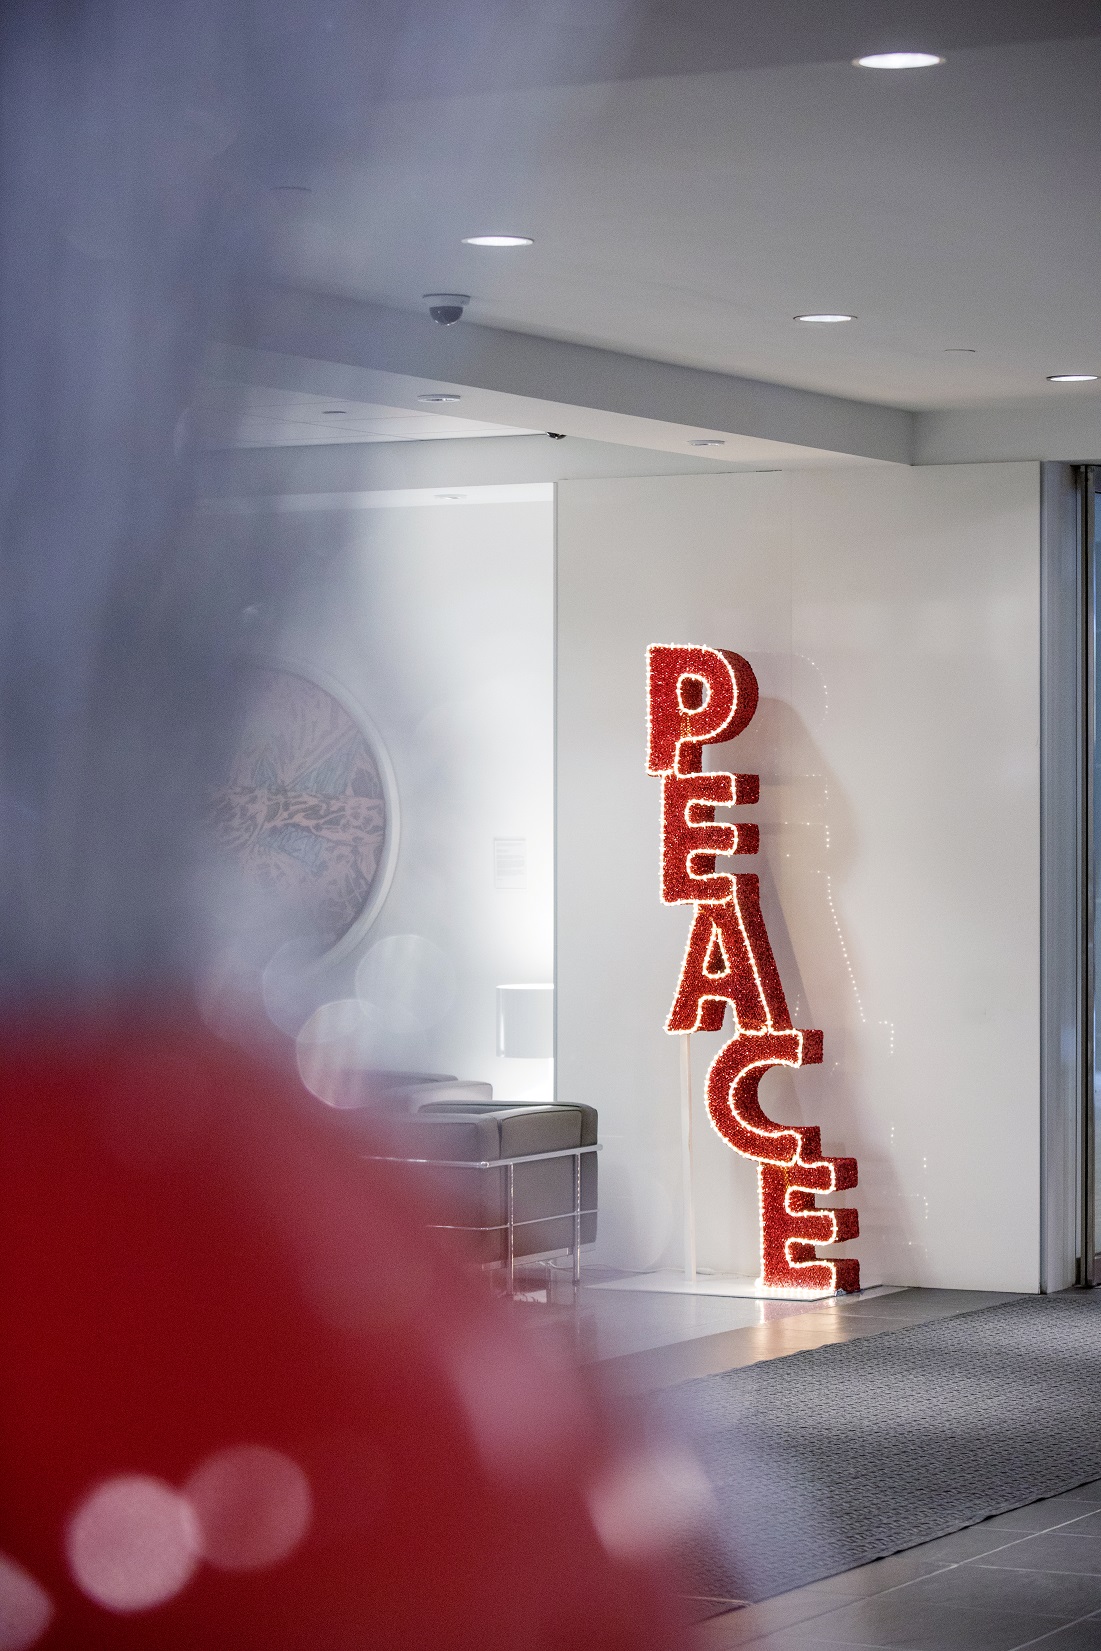 Creative sculptures and 3D letters come together to light up this contemporary lobby through the holiday season